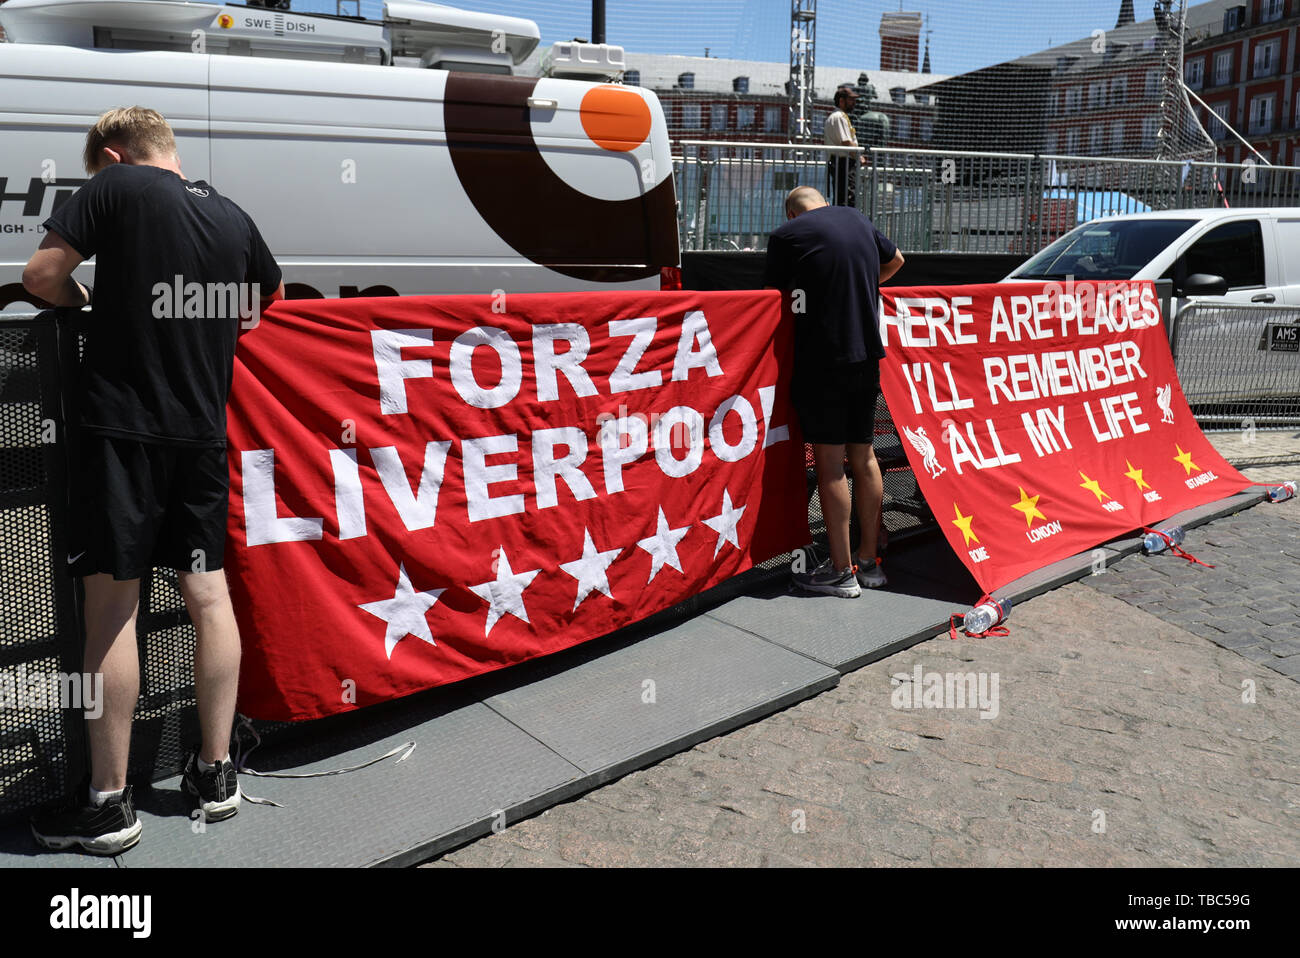 Liverpool fans attach flags to barriers in Plaza Mayor in Madrid ahead of Tottenham Hotspur v Liverpool in the Champions League Final at the Wanda Metropolitano stadium on Saturday night. Stock Photo